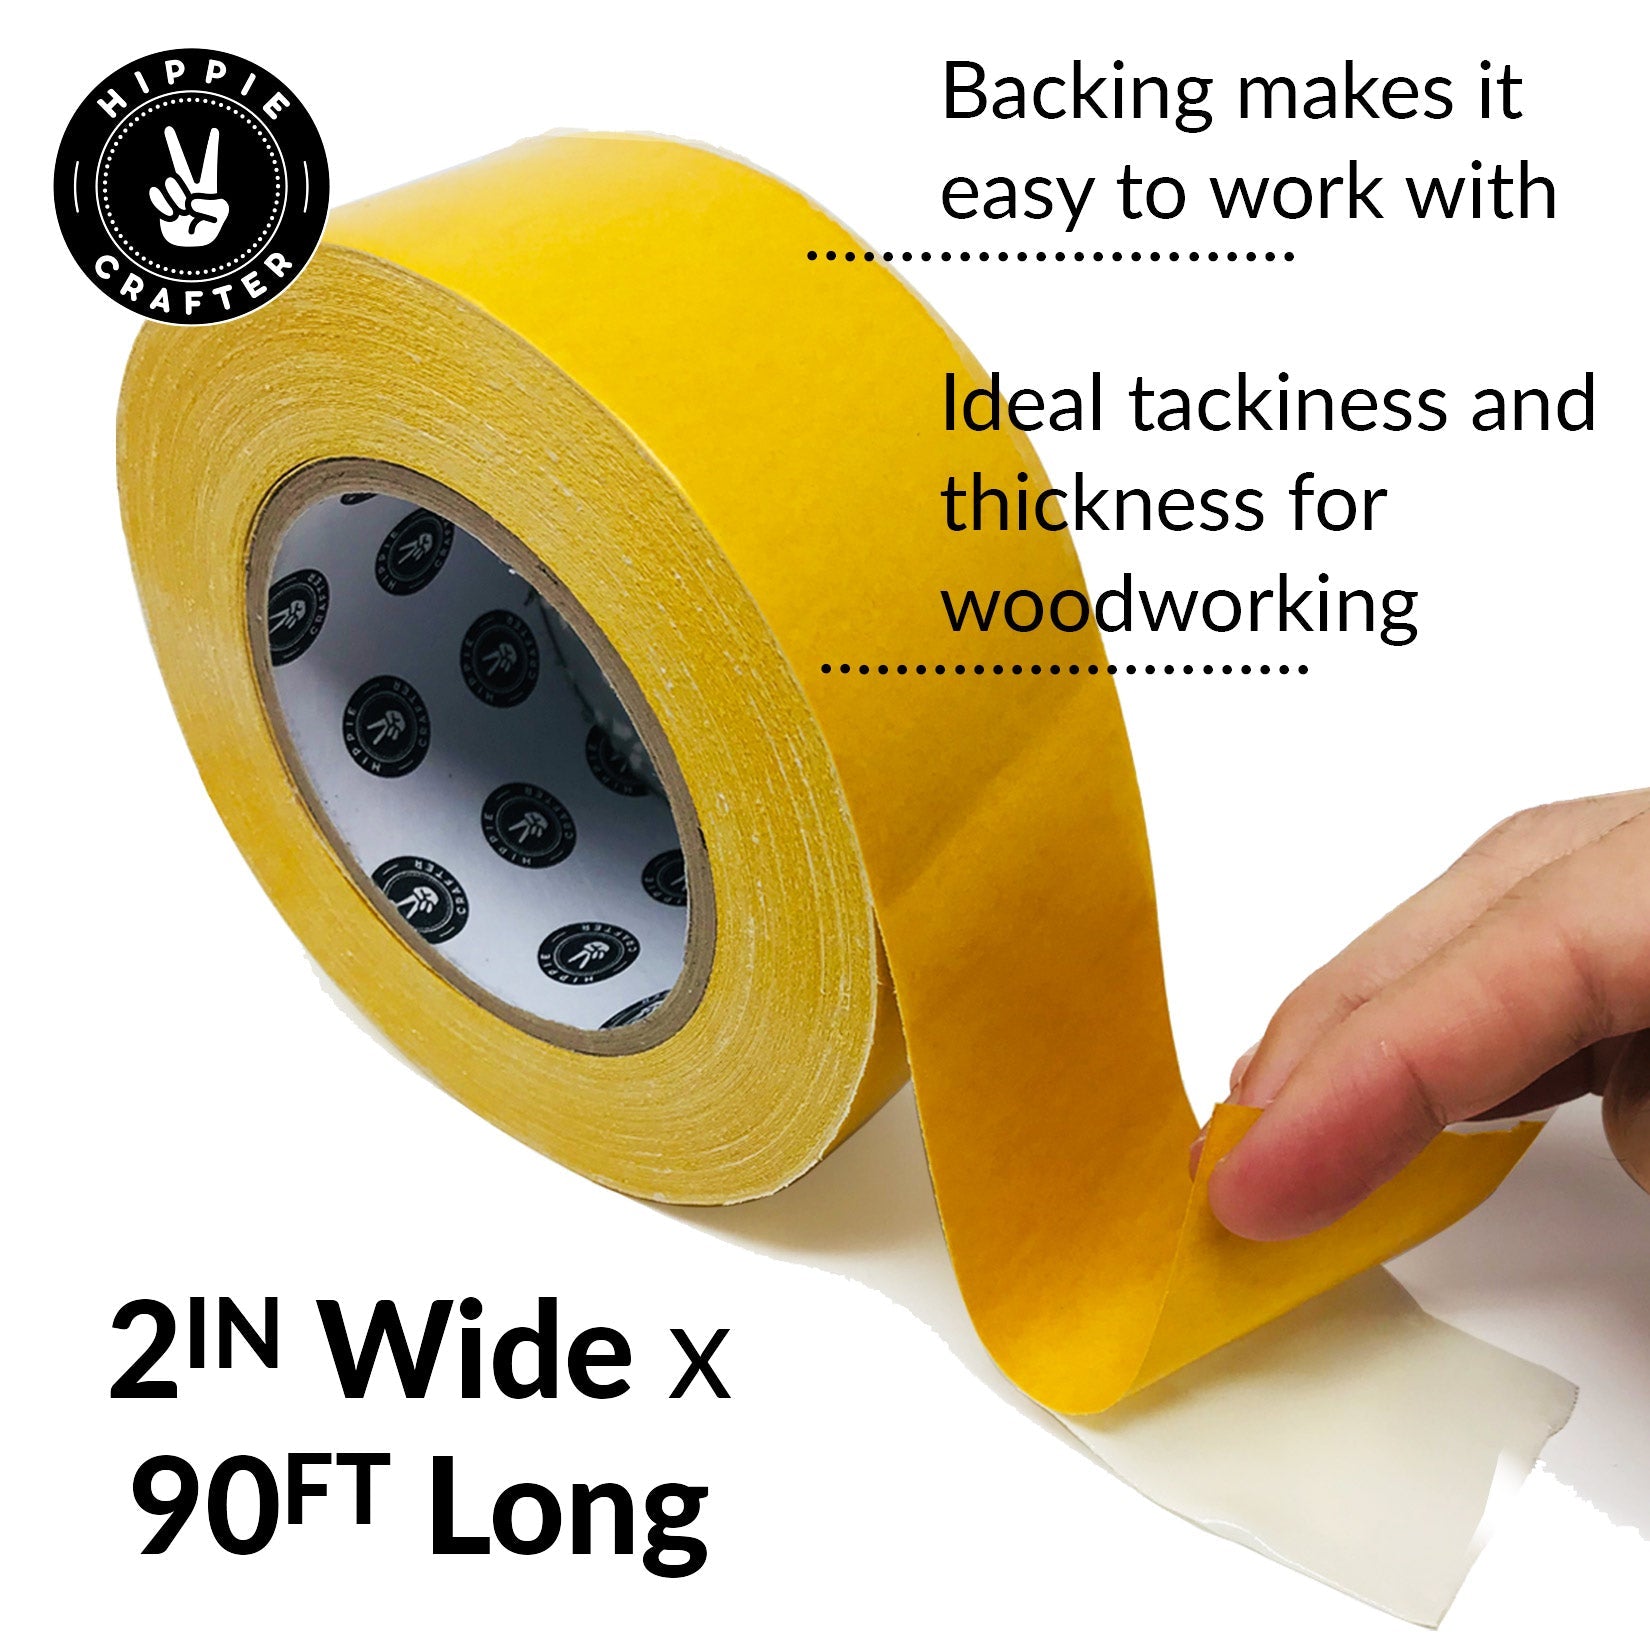 Shaper 2 Double-Sided Tape : The Strong and Reliable Tape That Will  Improve the Accuracy of Your CNC Woodworking Projects